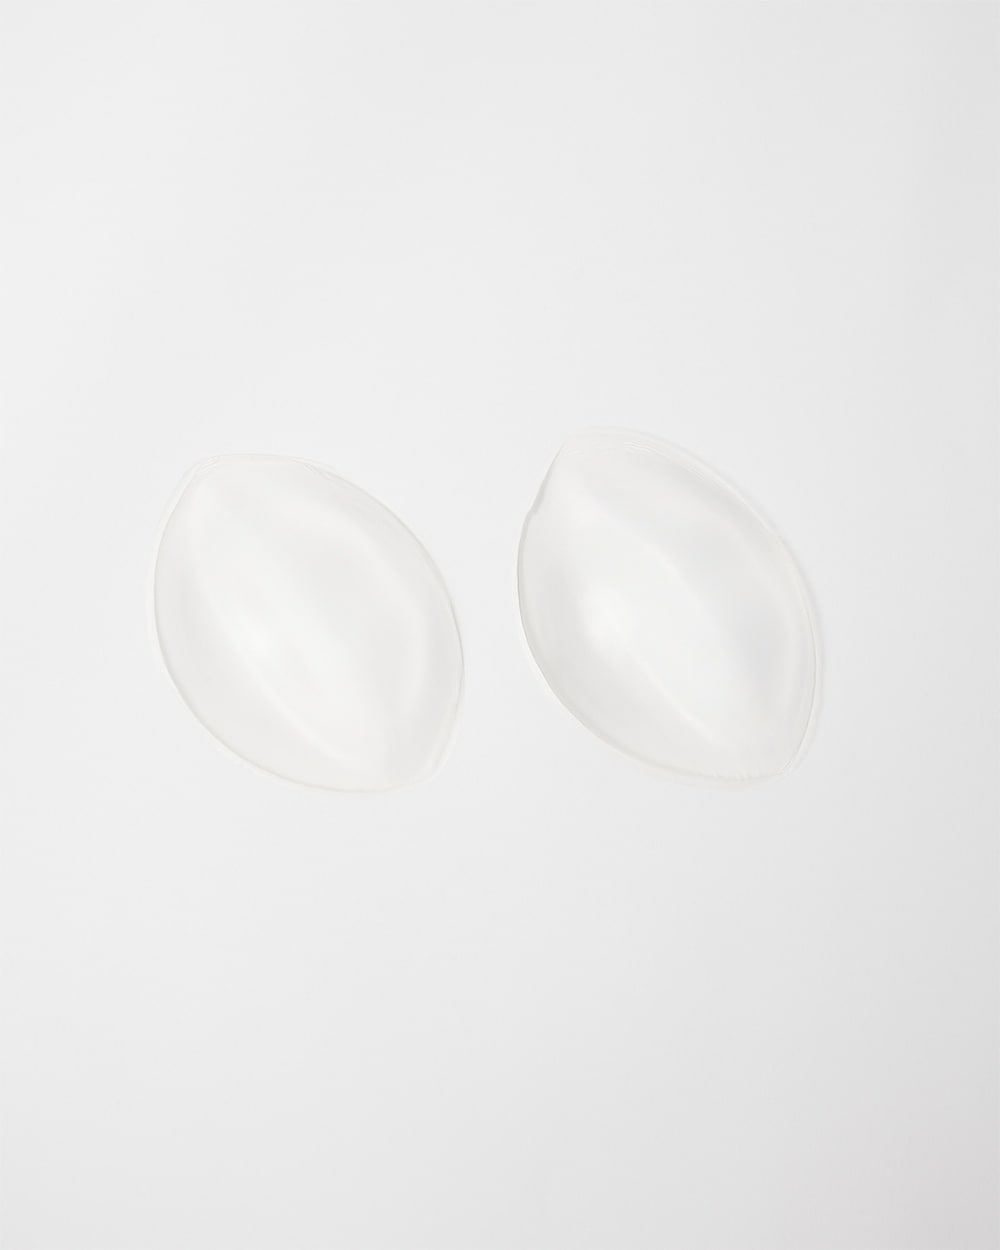 DClub Silicone Bra Inserts Breast, Bra Pads Inserts Clear Enhancers Gel Bra Push  Up Pads for Women., 1 Pair